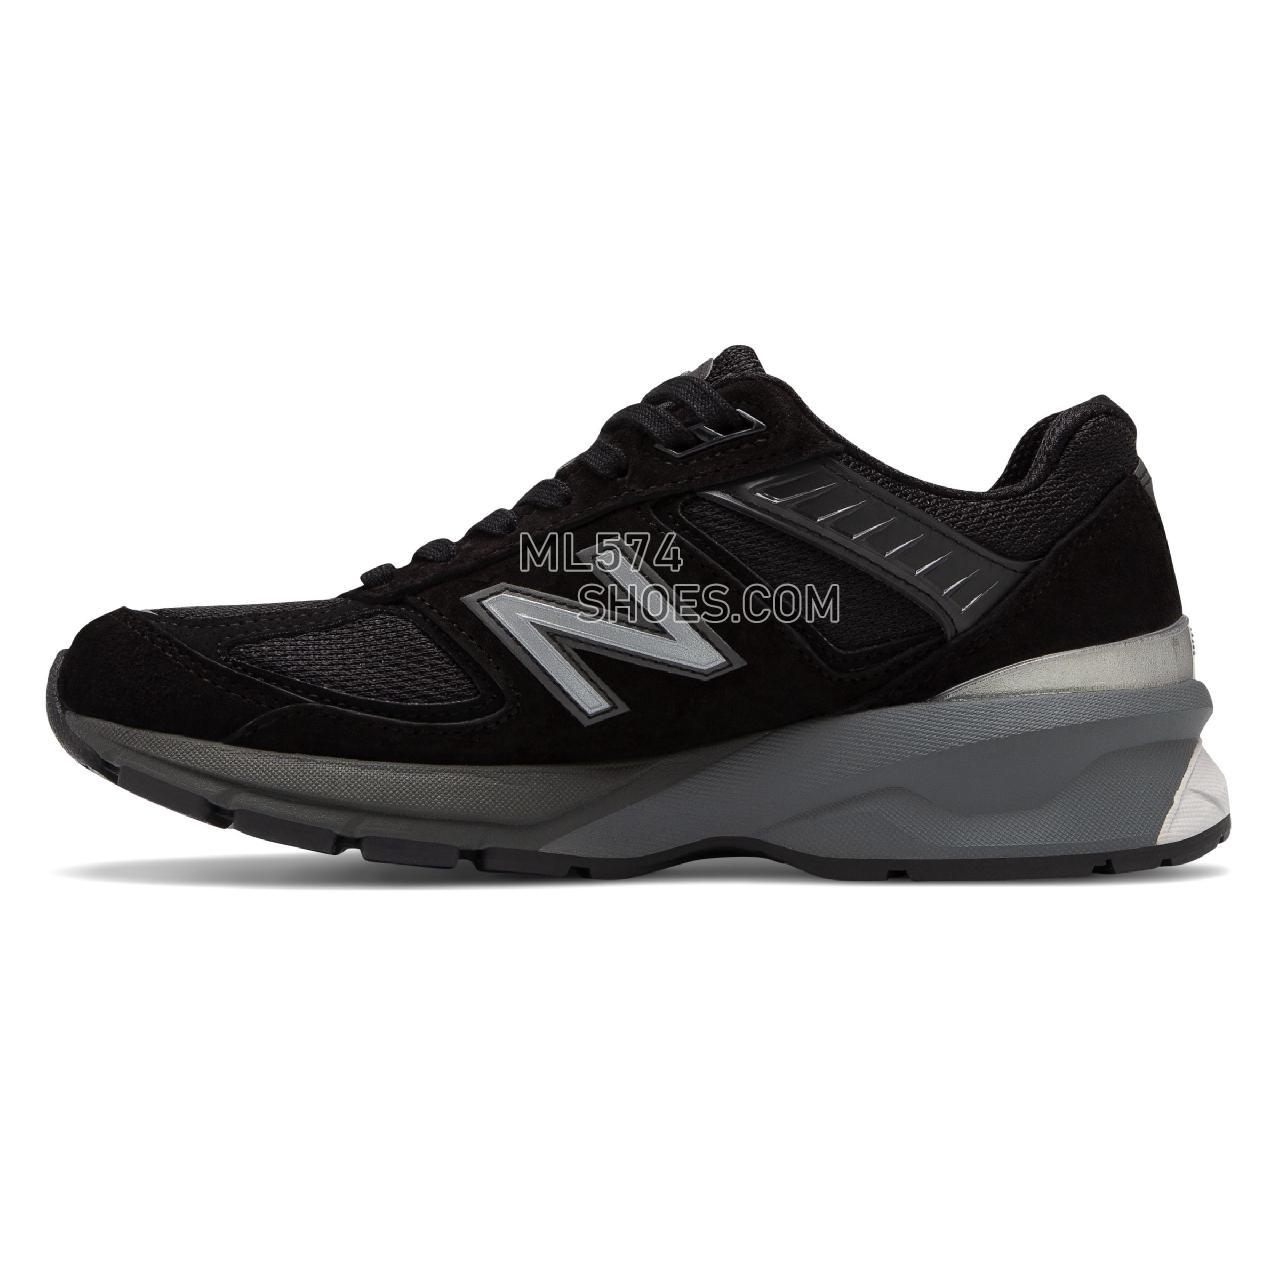 New Balance 990v5 Made in US - Women's Neutral Running - Black with Silver - W990BK5